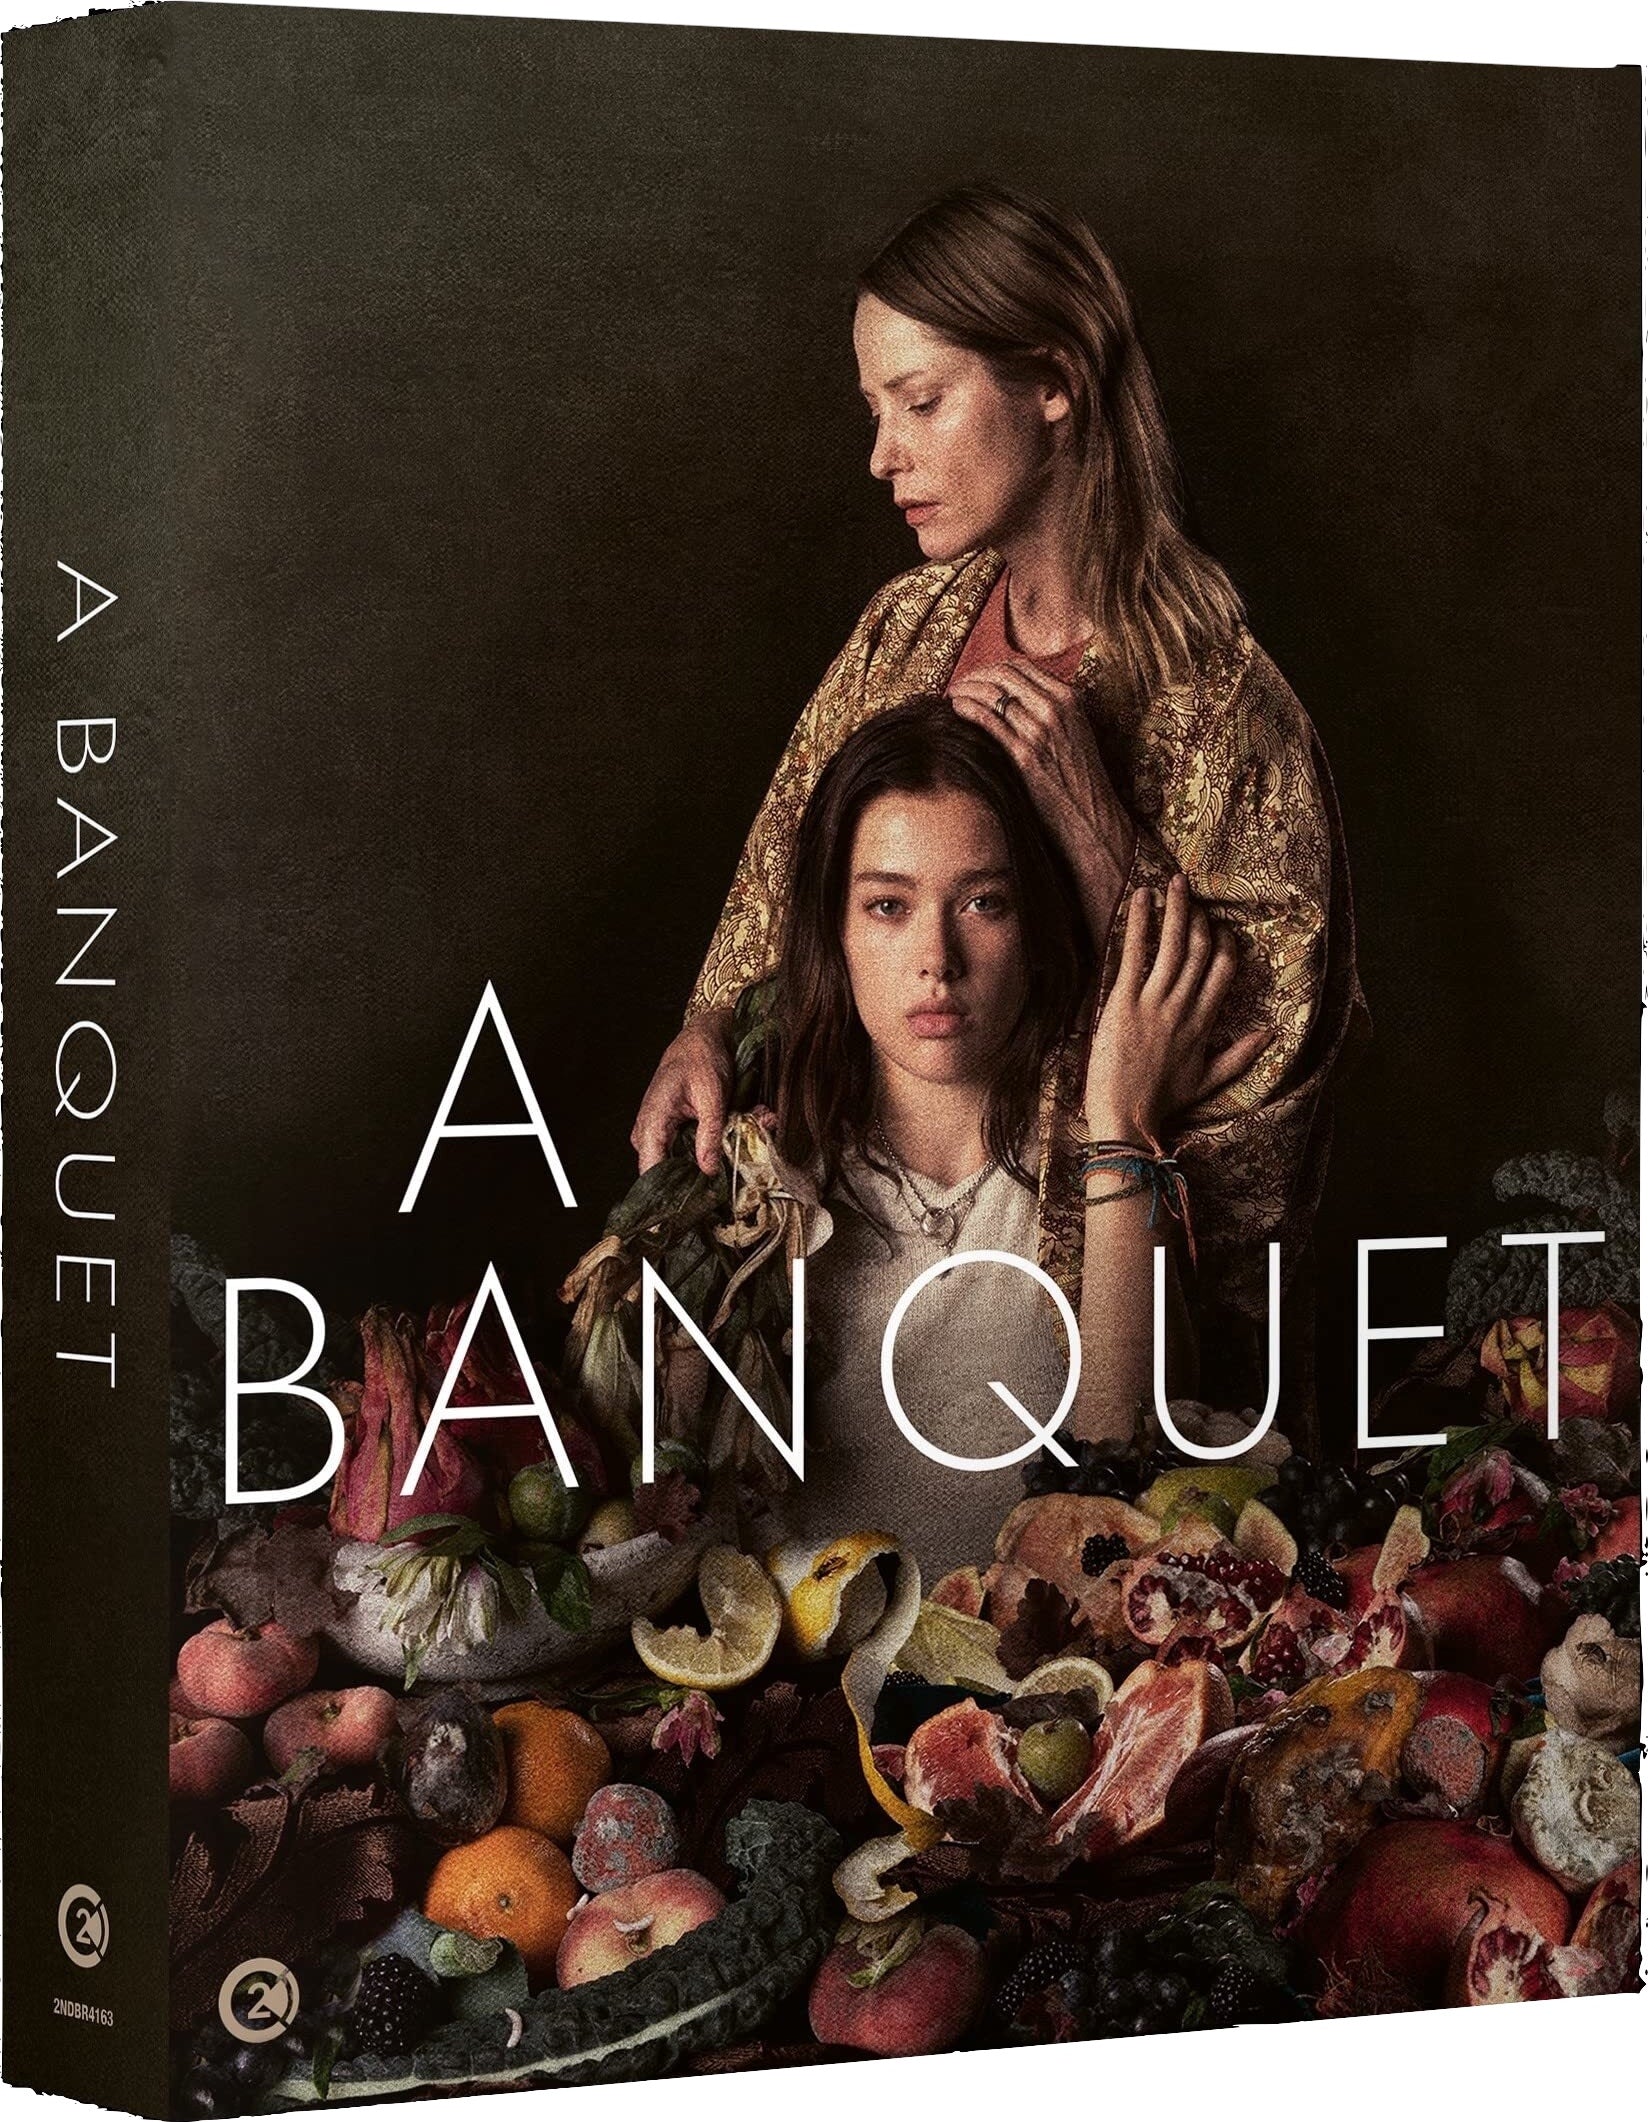 A BANQUET (REGION B IMPORT - LIMITED EDITION) BLU-RAY [SCRATCH AND DENT]